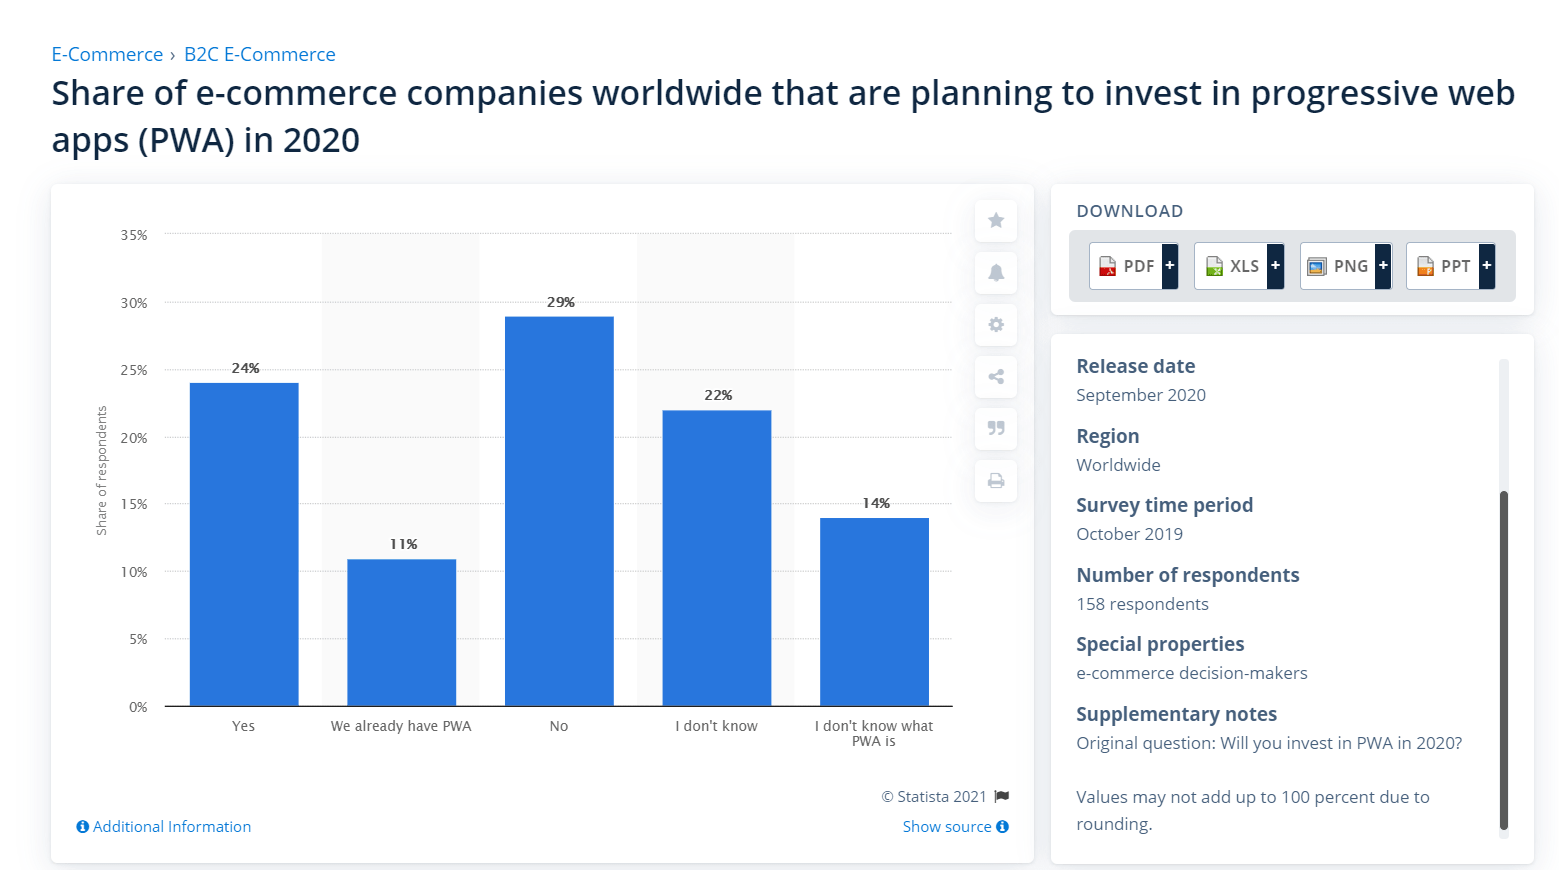  percentage of global eCommerce companies that were planning to develop PWAs in 2020